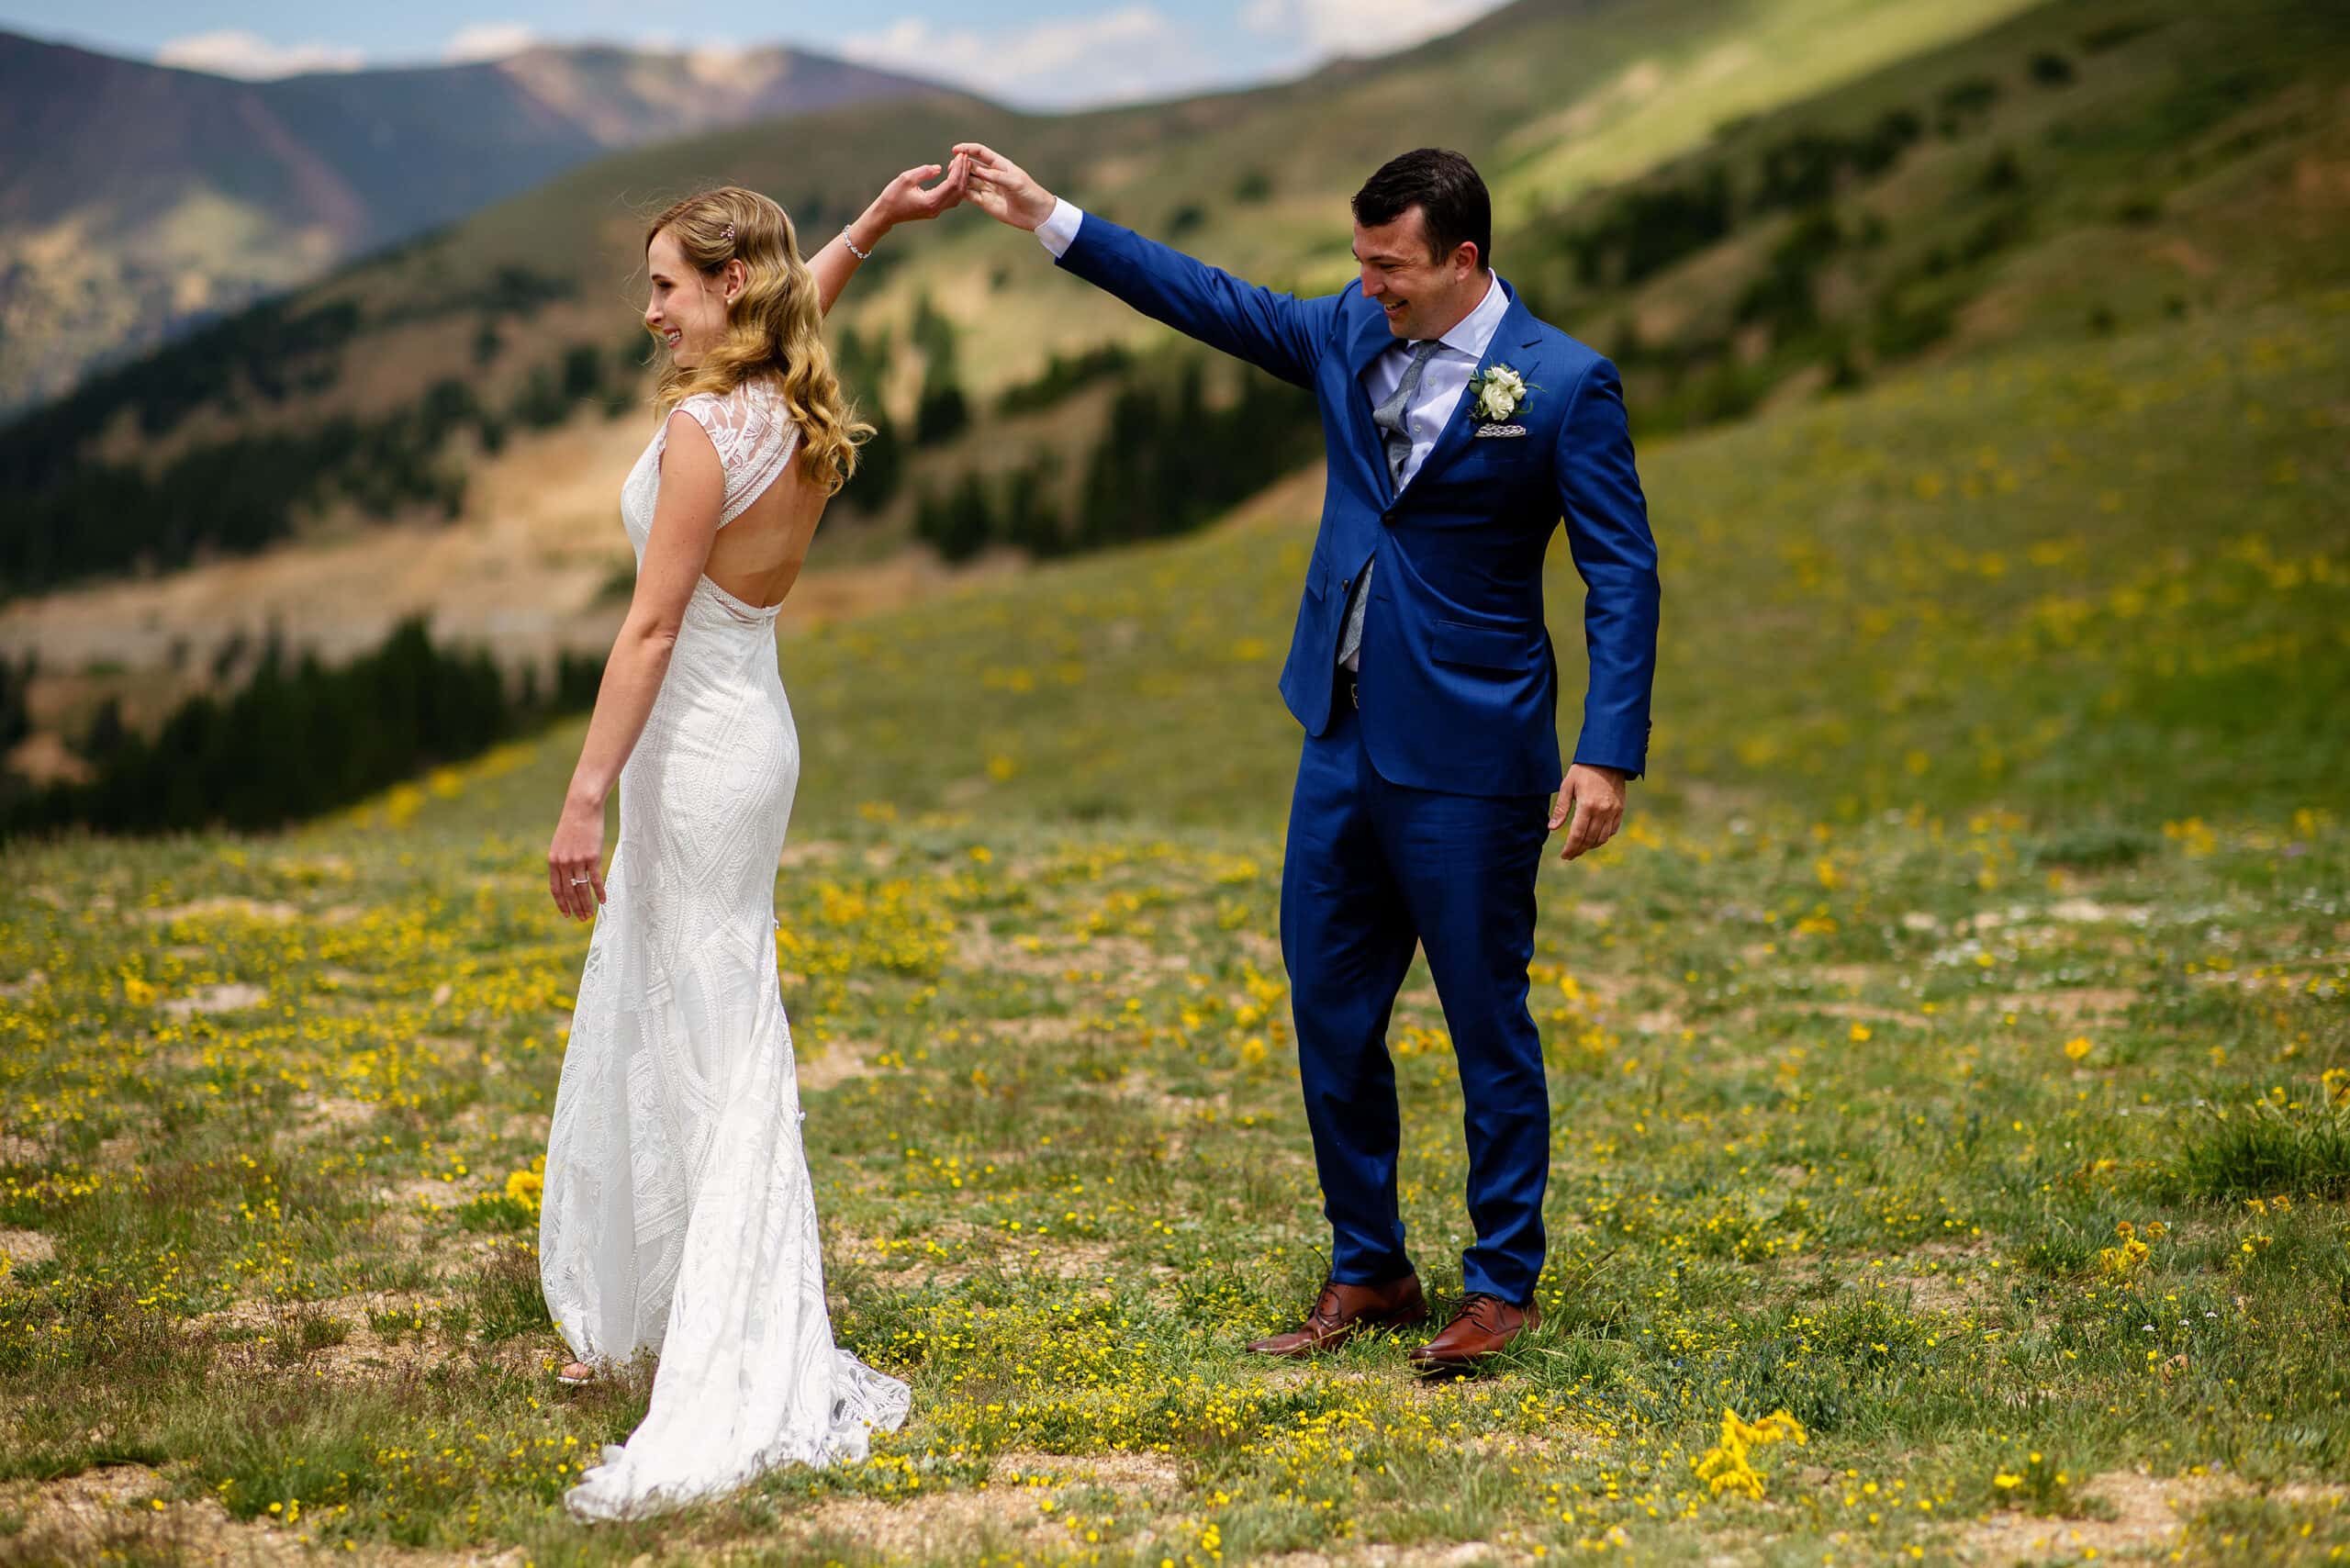 The groom spins the bride around on Lovelans Pass during their first look